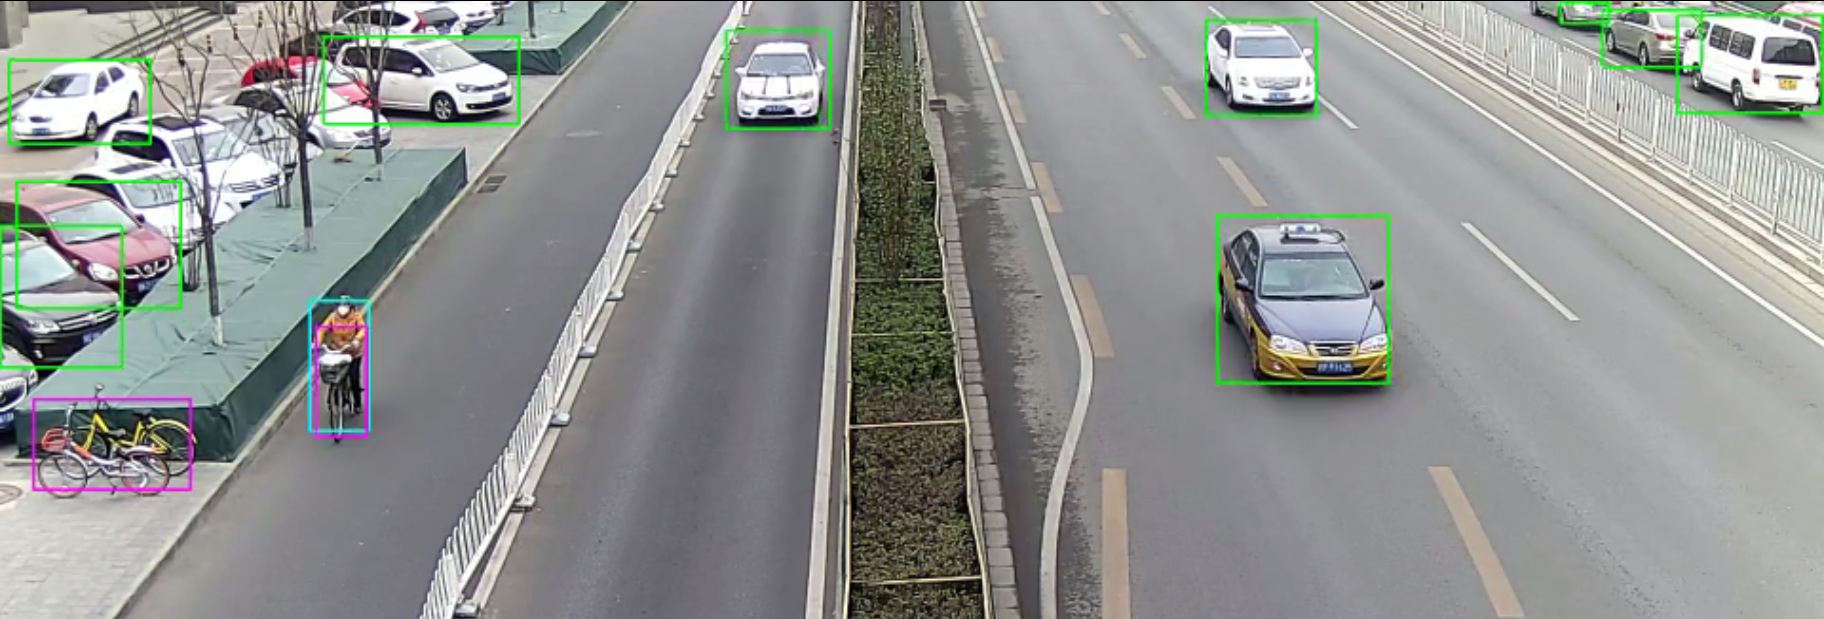 person-vehicle-bike-detection-crossroad-0078.png